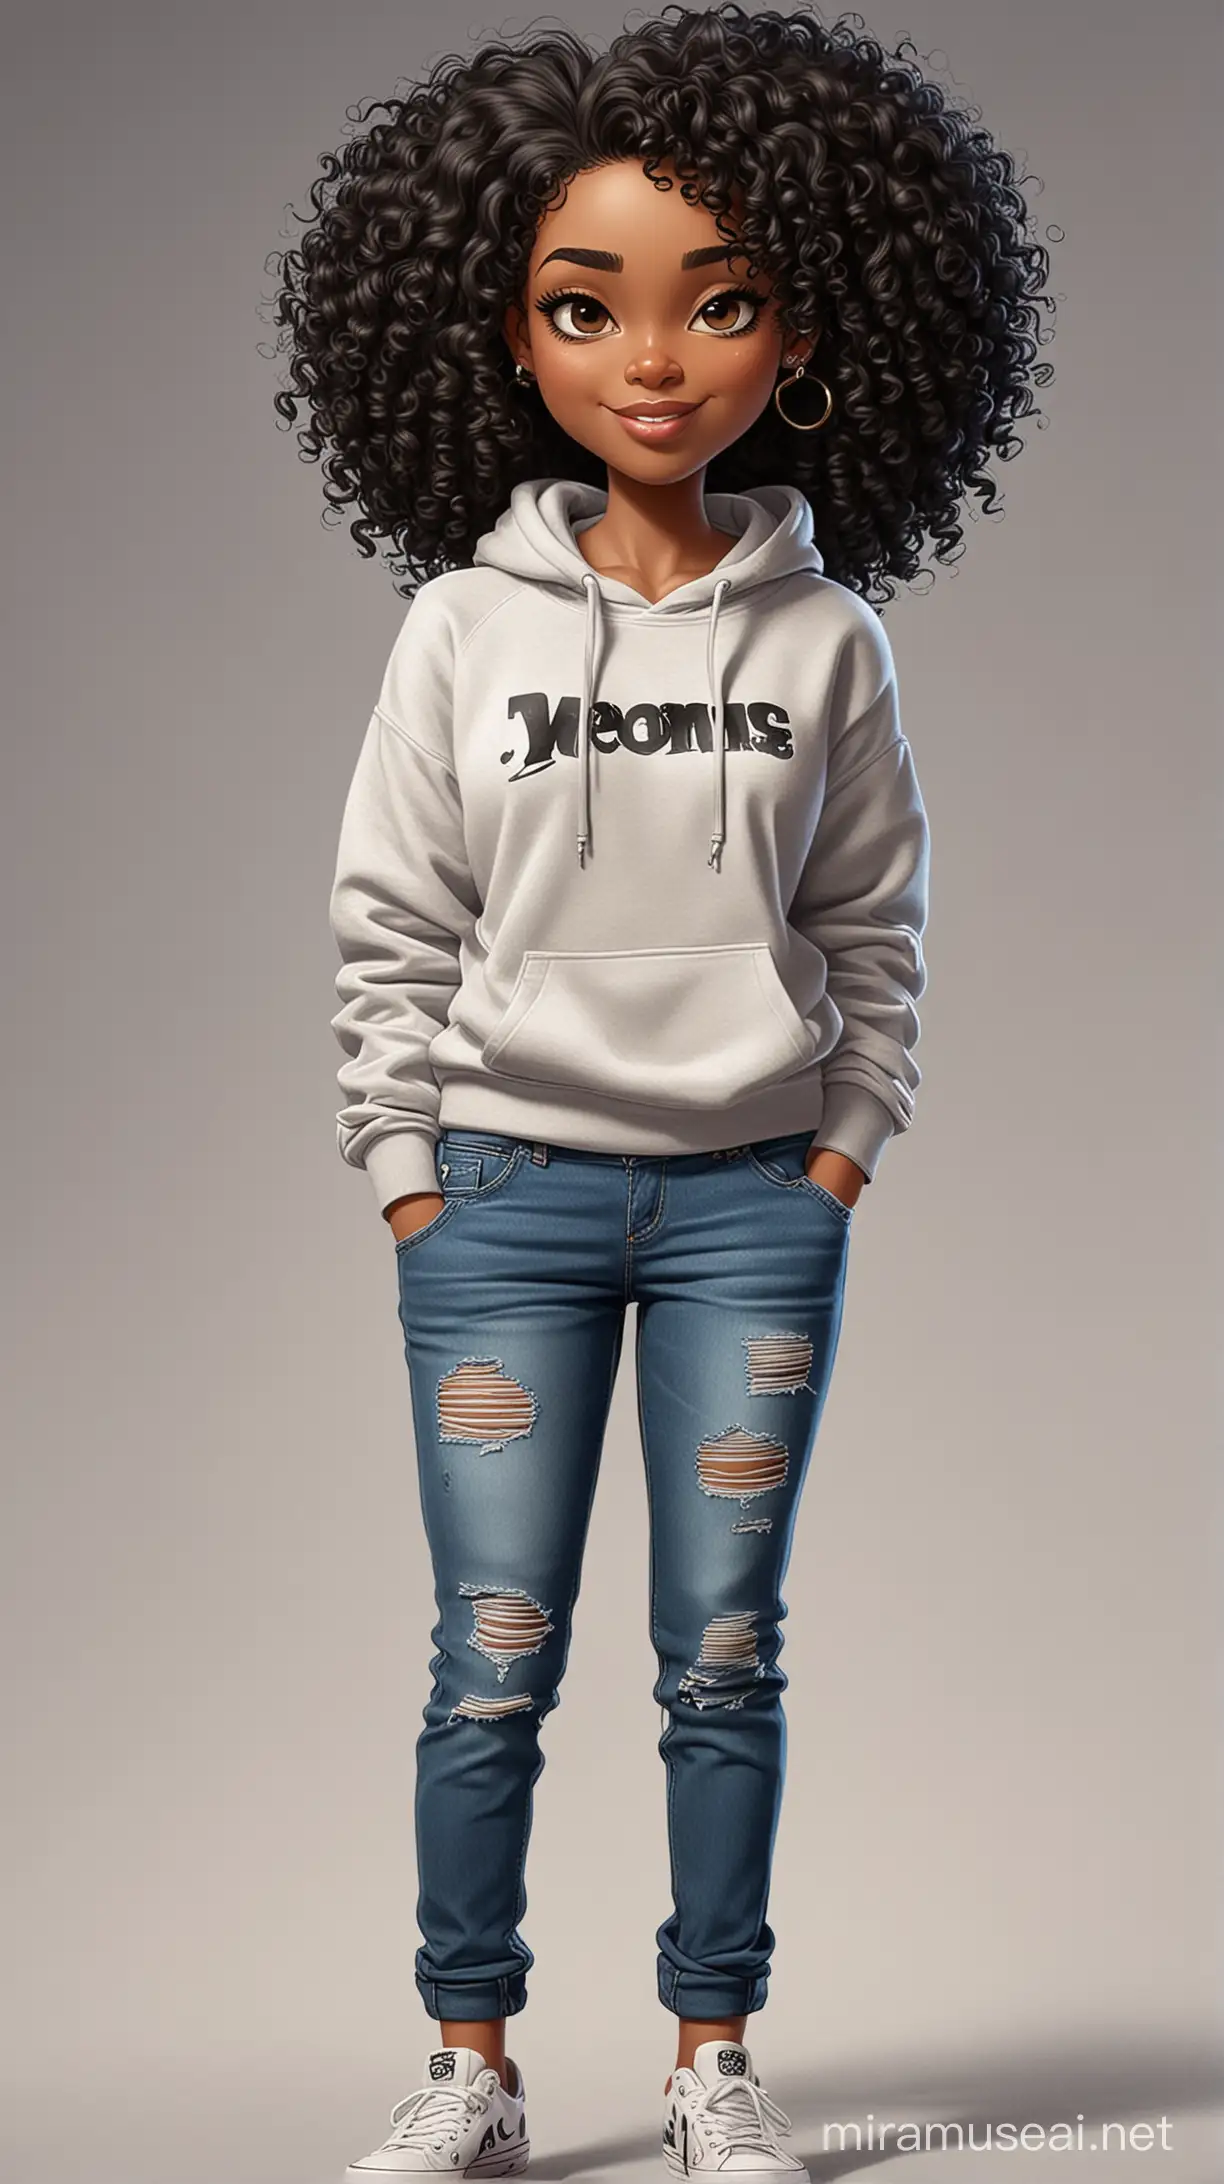 Cheerful Black Woman in Casual Attire with Curly Hair